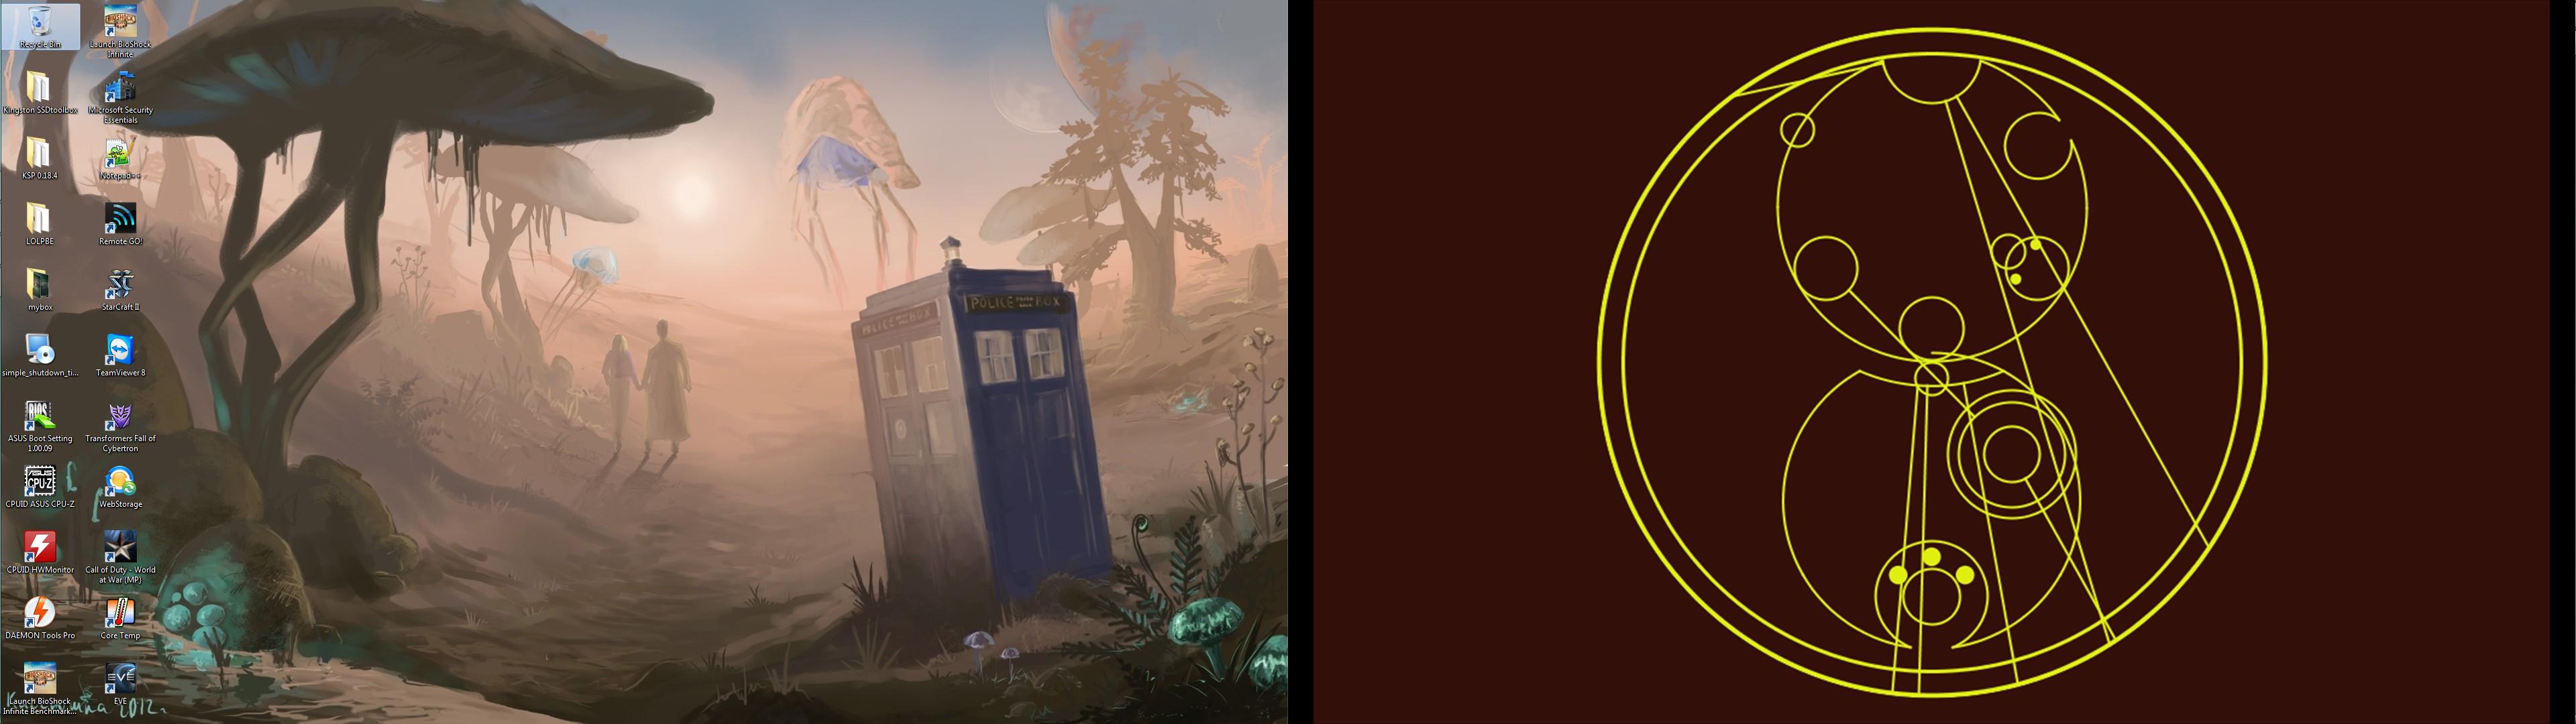 Doctor Who Dual Screen Wallpaper On